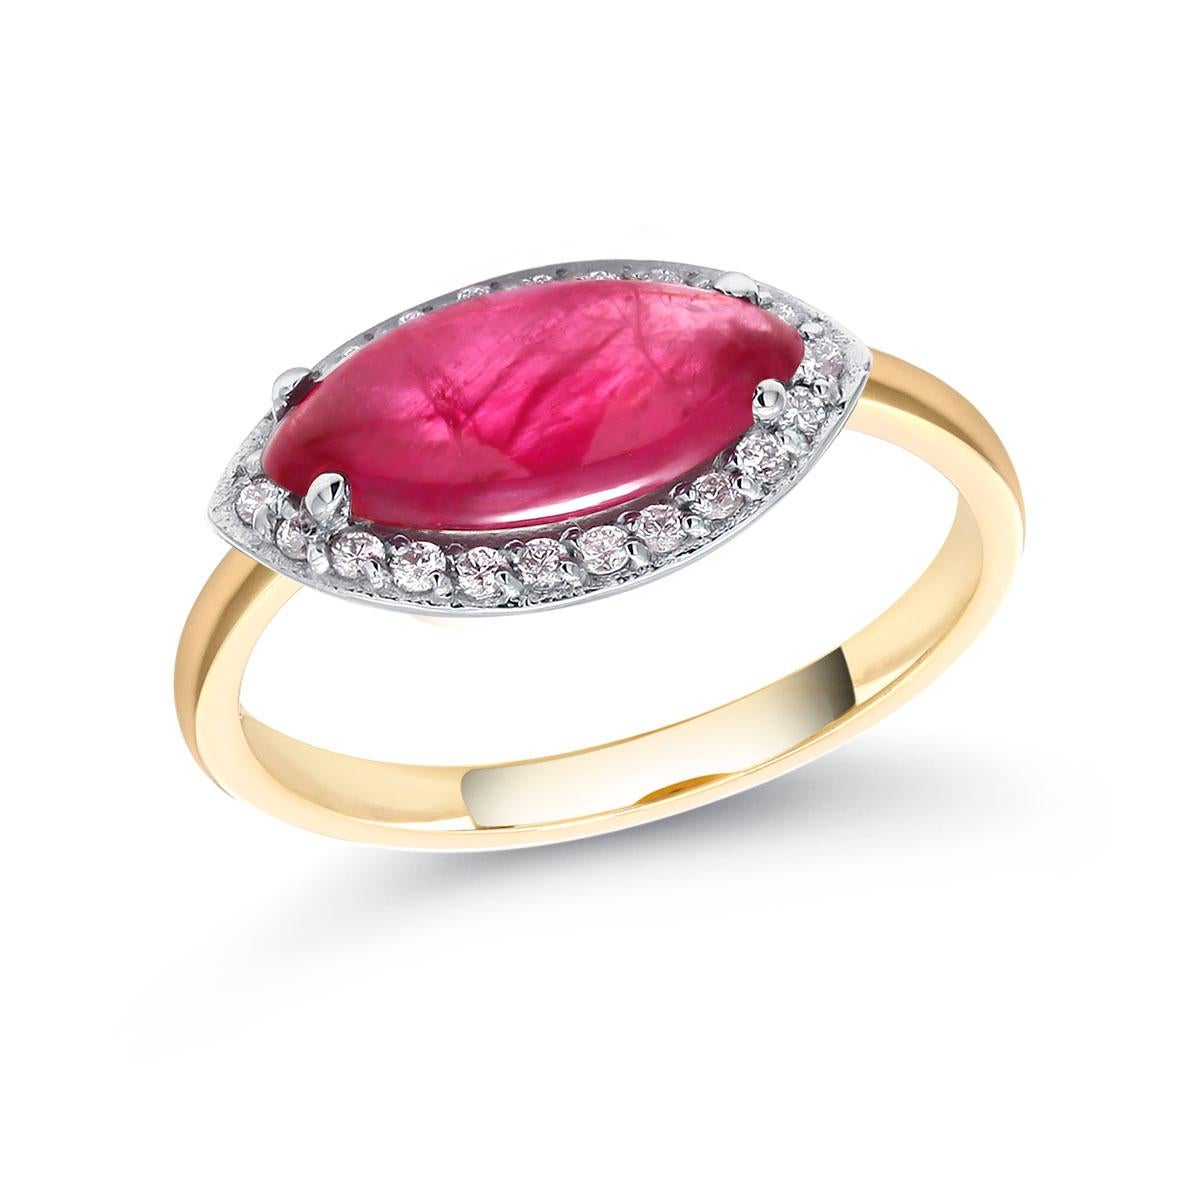 Women's Marquise Cabochon Ruby Set in 18 Karat Yellow and White Gold Cocktail Ring